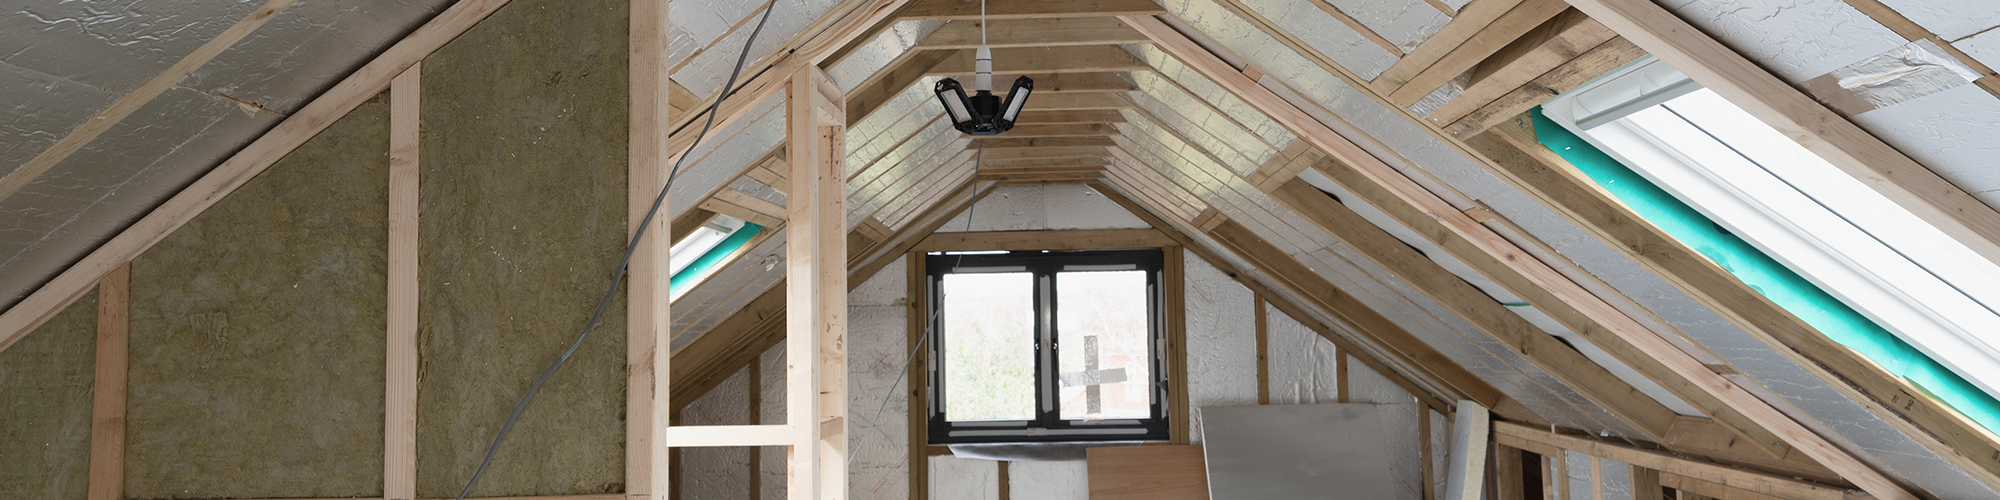 A partially converted loft: Tips on Building Regs for Loft Conversion and Buying a House with Loft Conversion Without Building Regulations from SAM Conveyancing